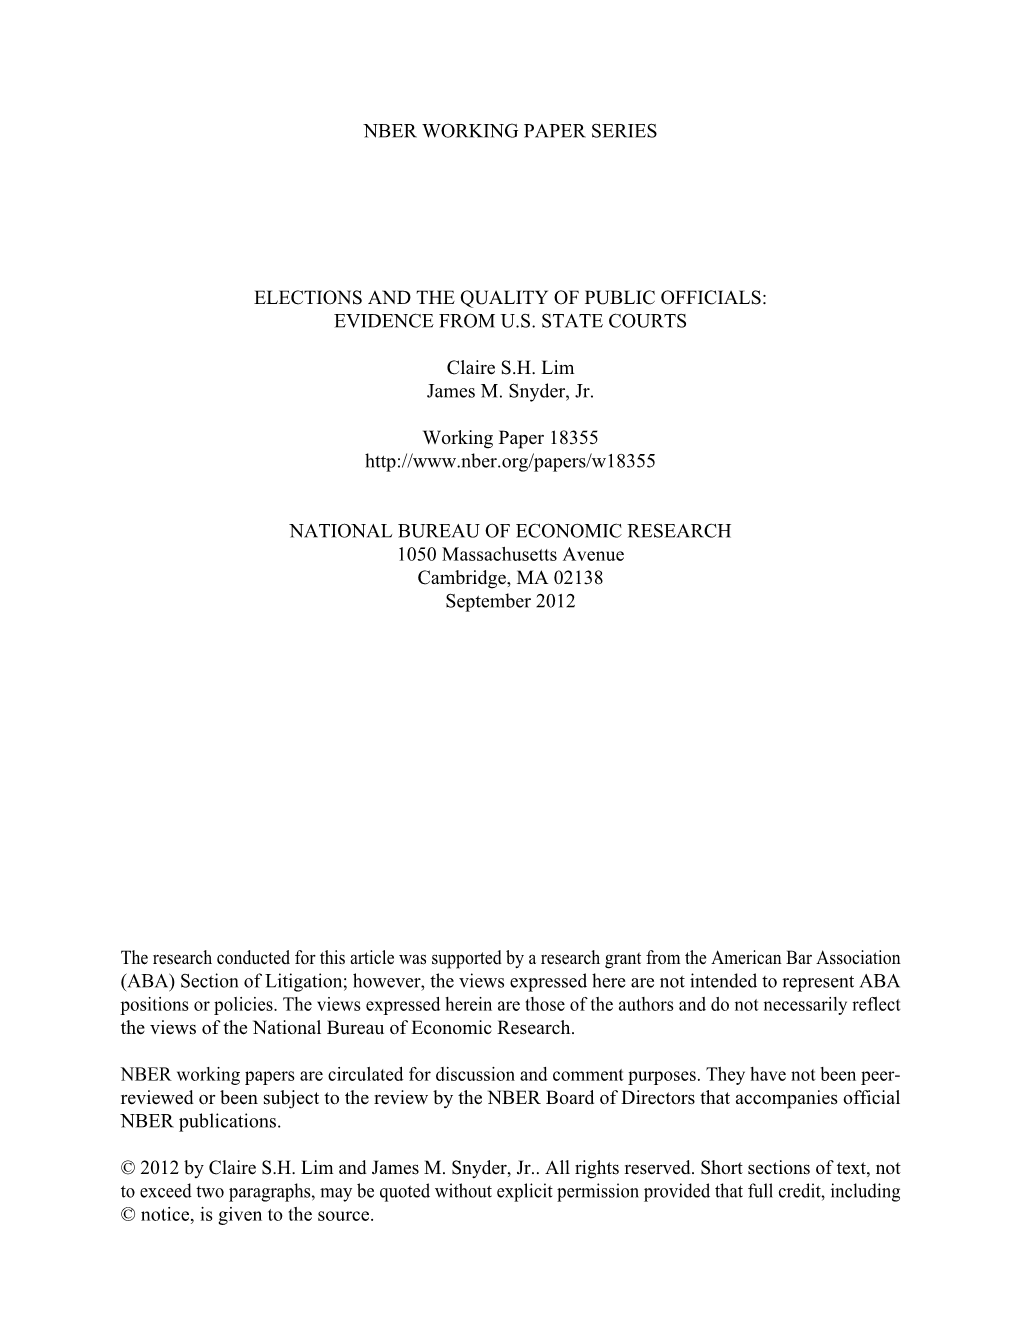 Elections and the Quality of Public Officials: Evidence from U.S. State Courts